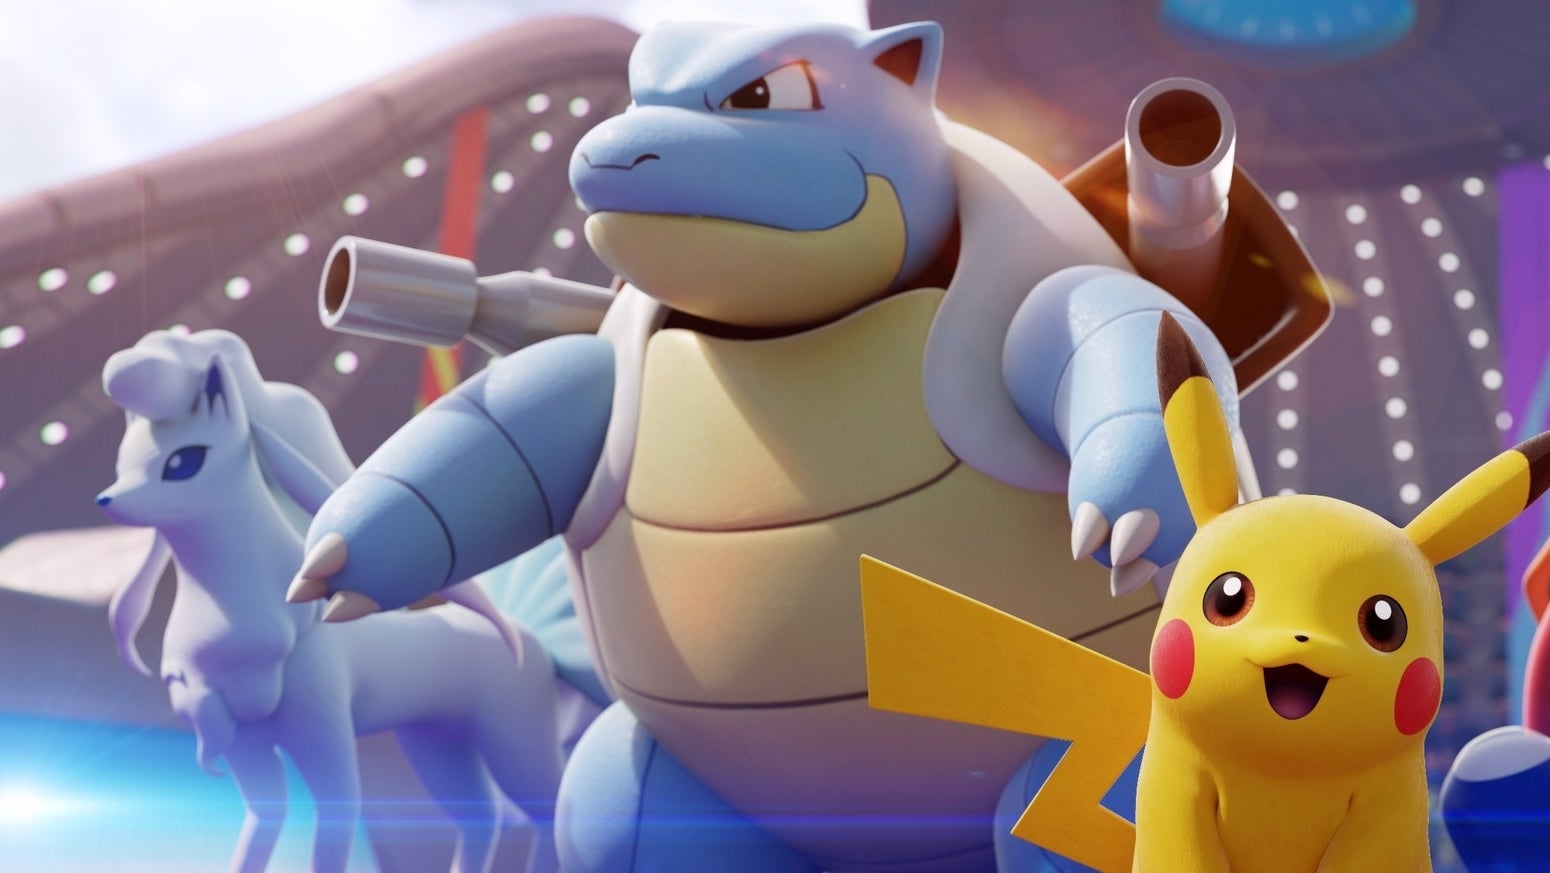 Image for Pokémon Unite purposefully hides the score to avoid rage quits